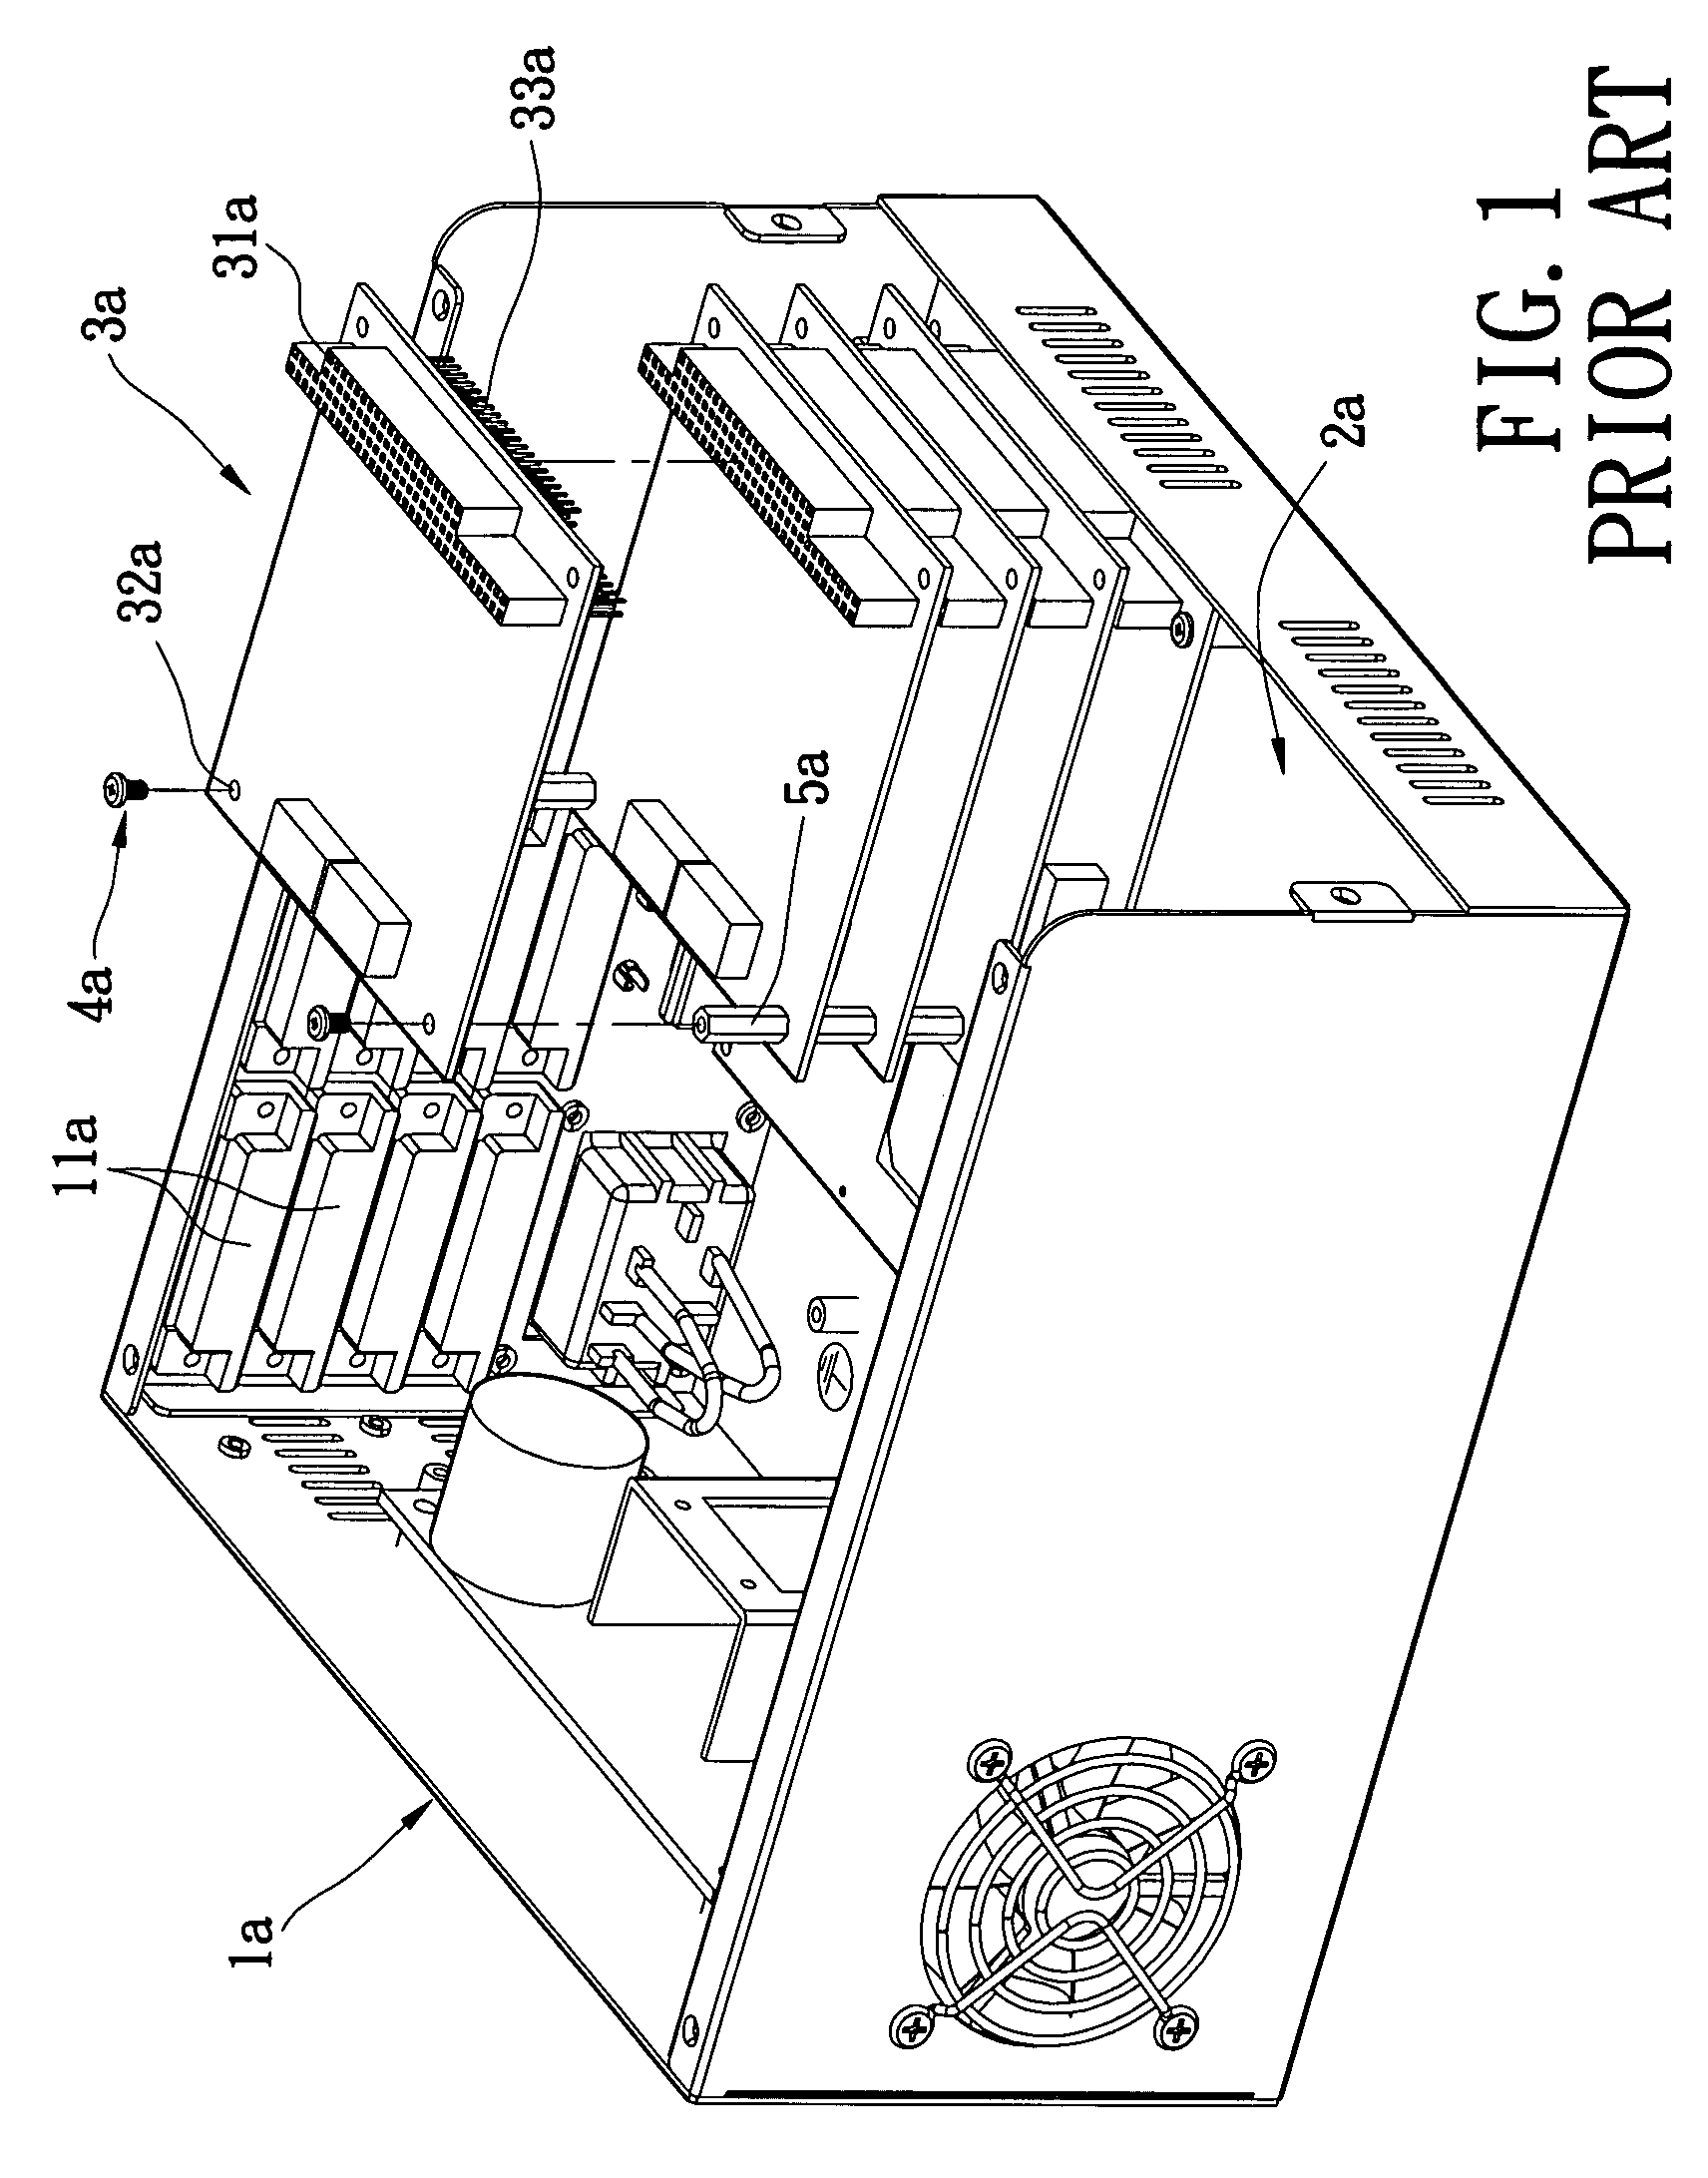 Expansion module and system thereof